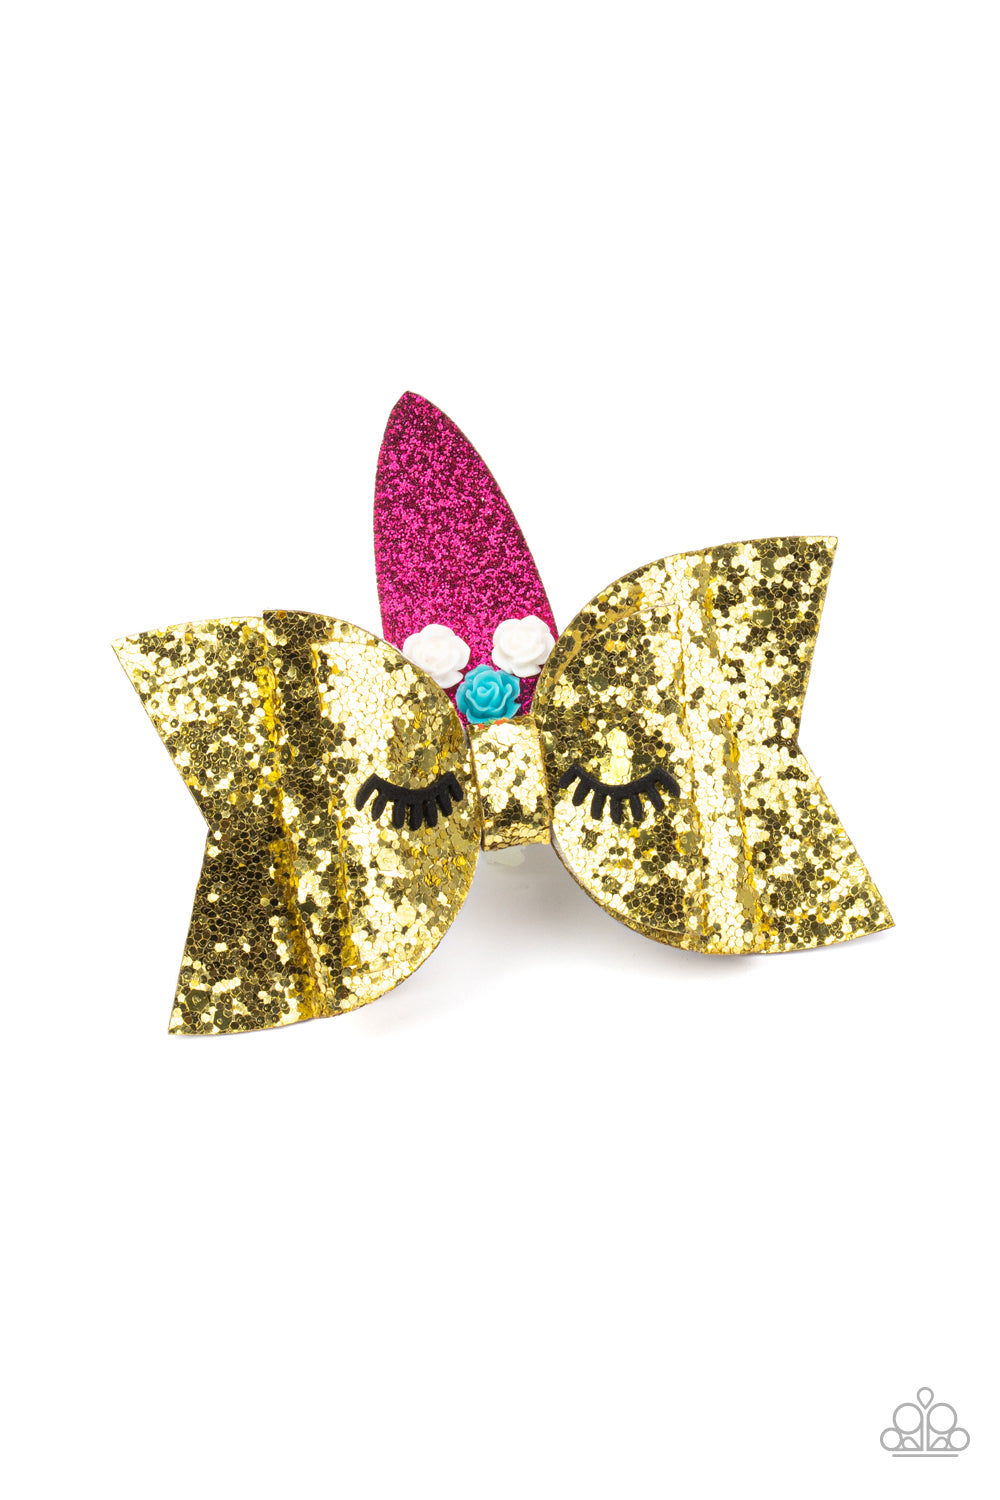 Just Be a YOU-nicorn Gold Hair Clip